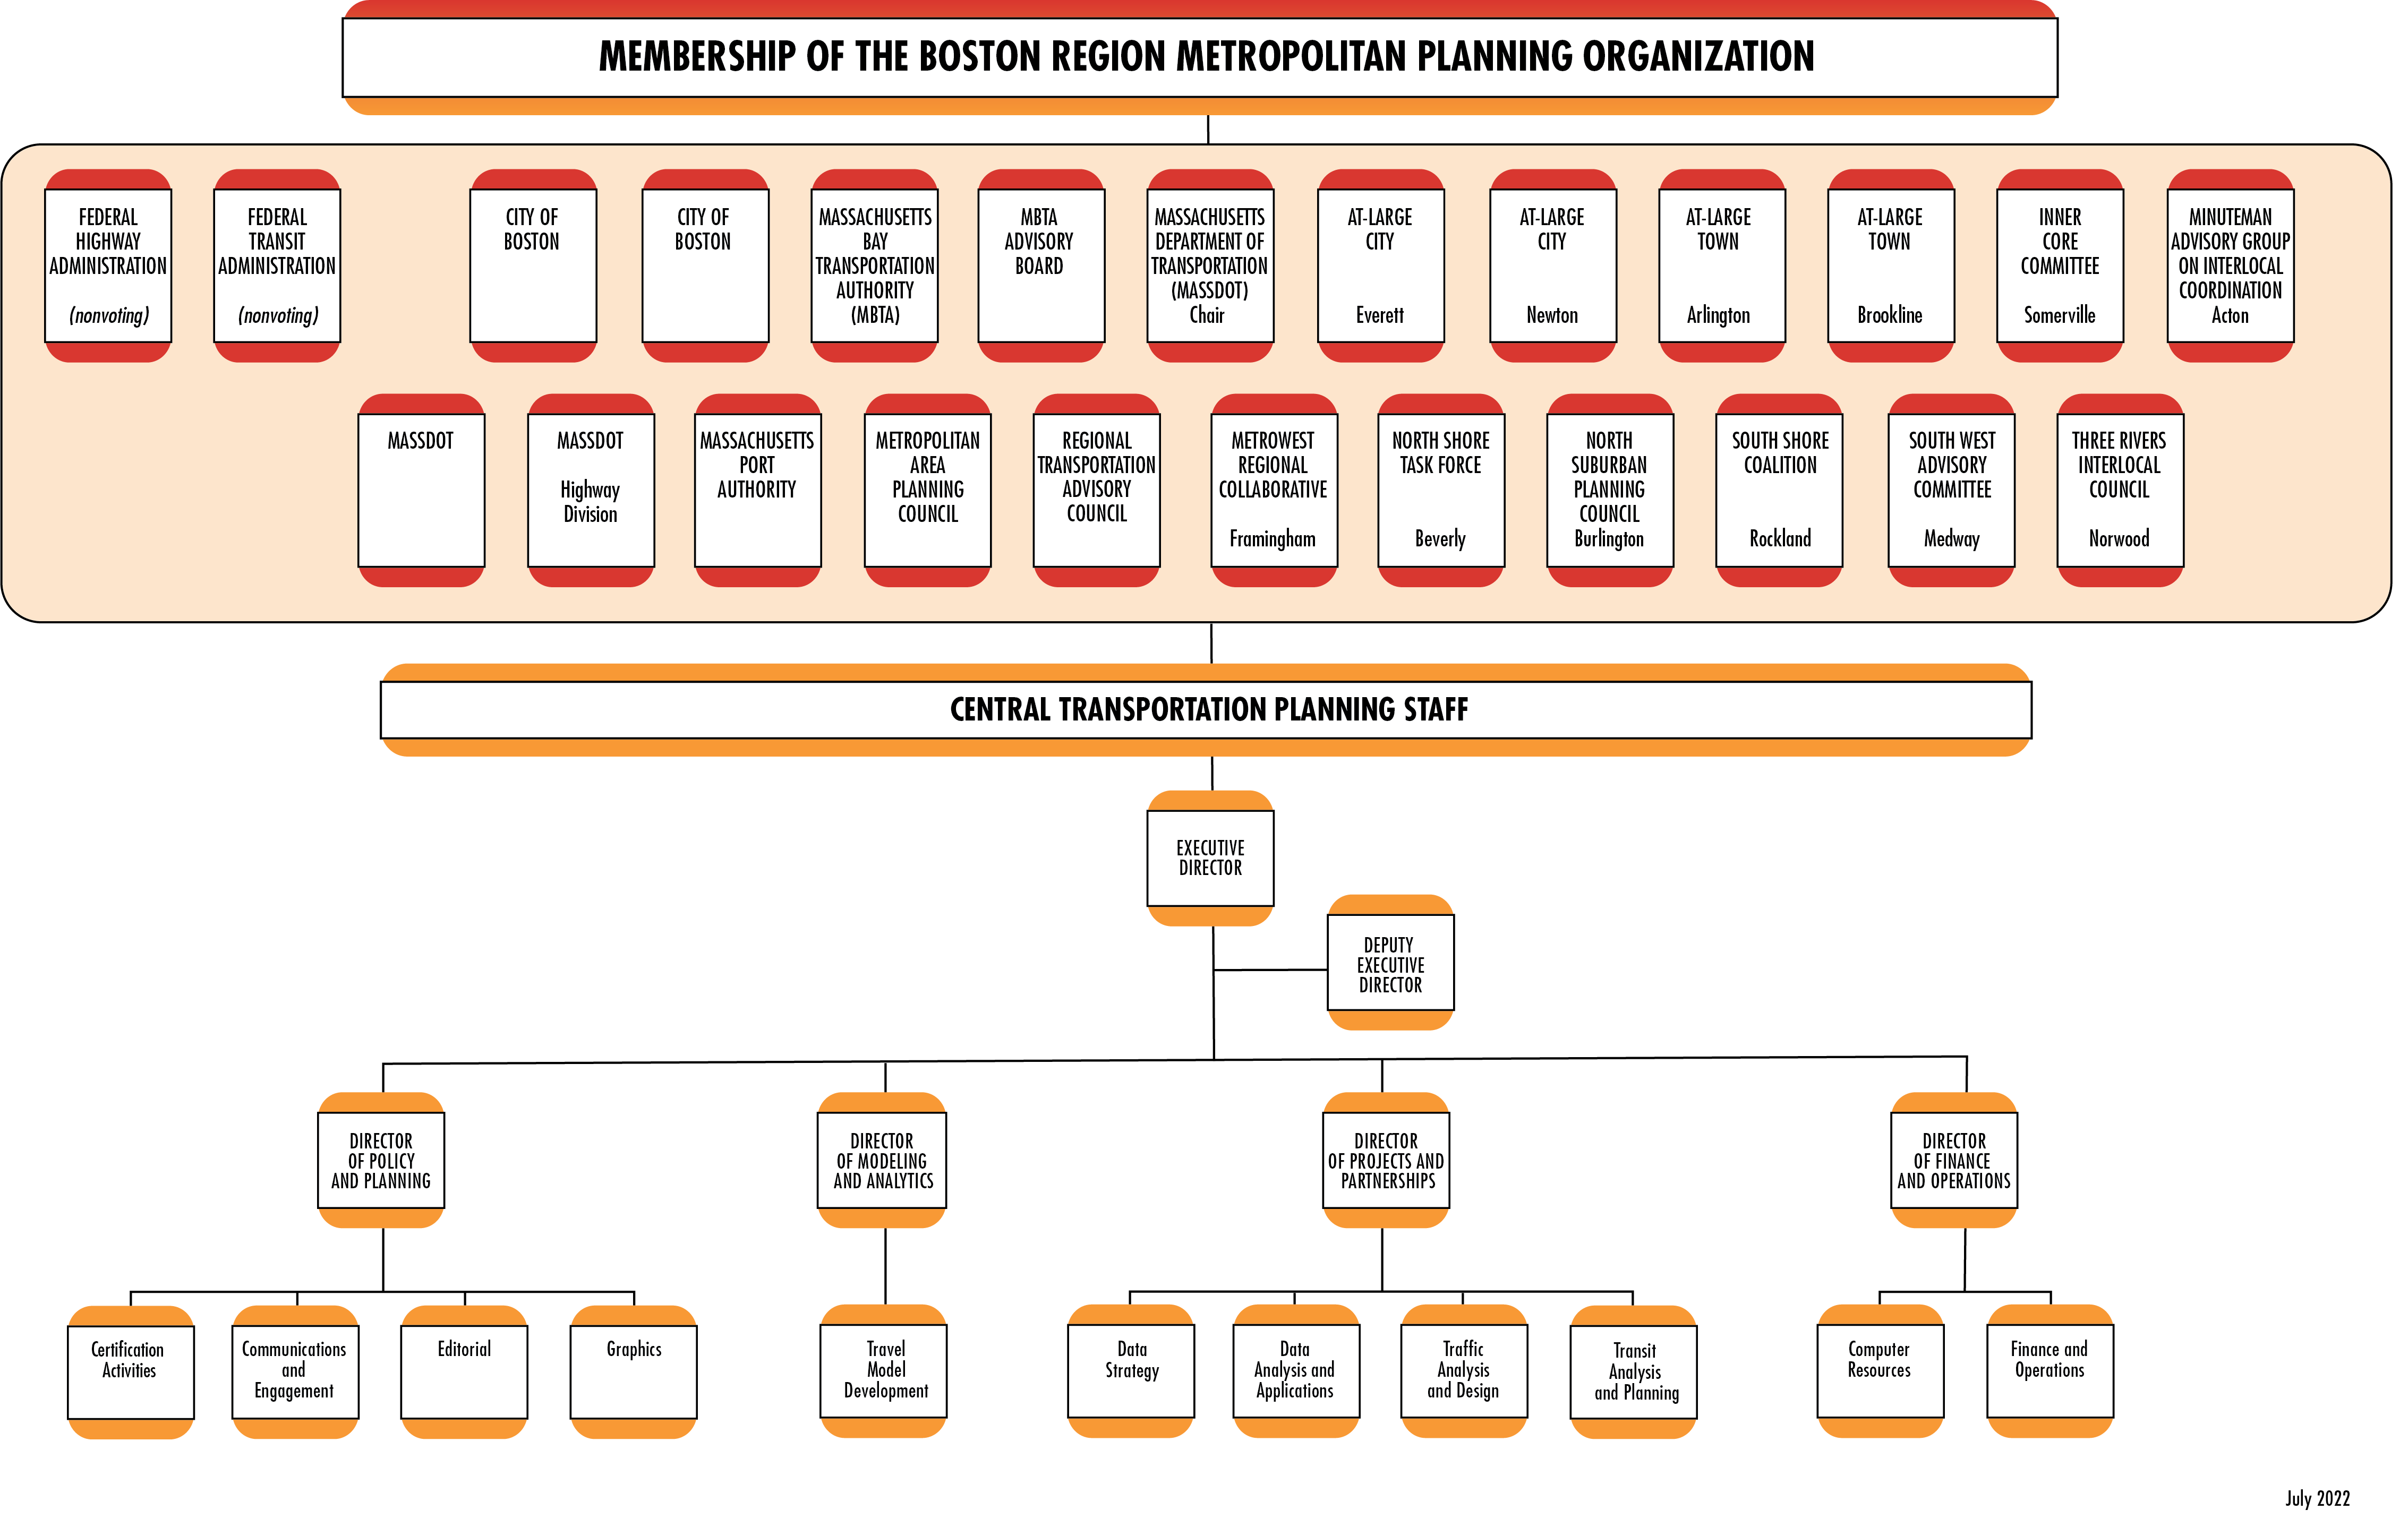 This figure shows the organizational chart for the Boston Region Metropolitan Planning Organization and the Central Transportation Planning Staff. 